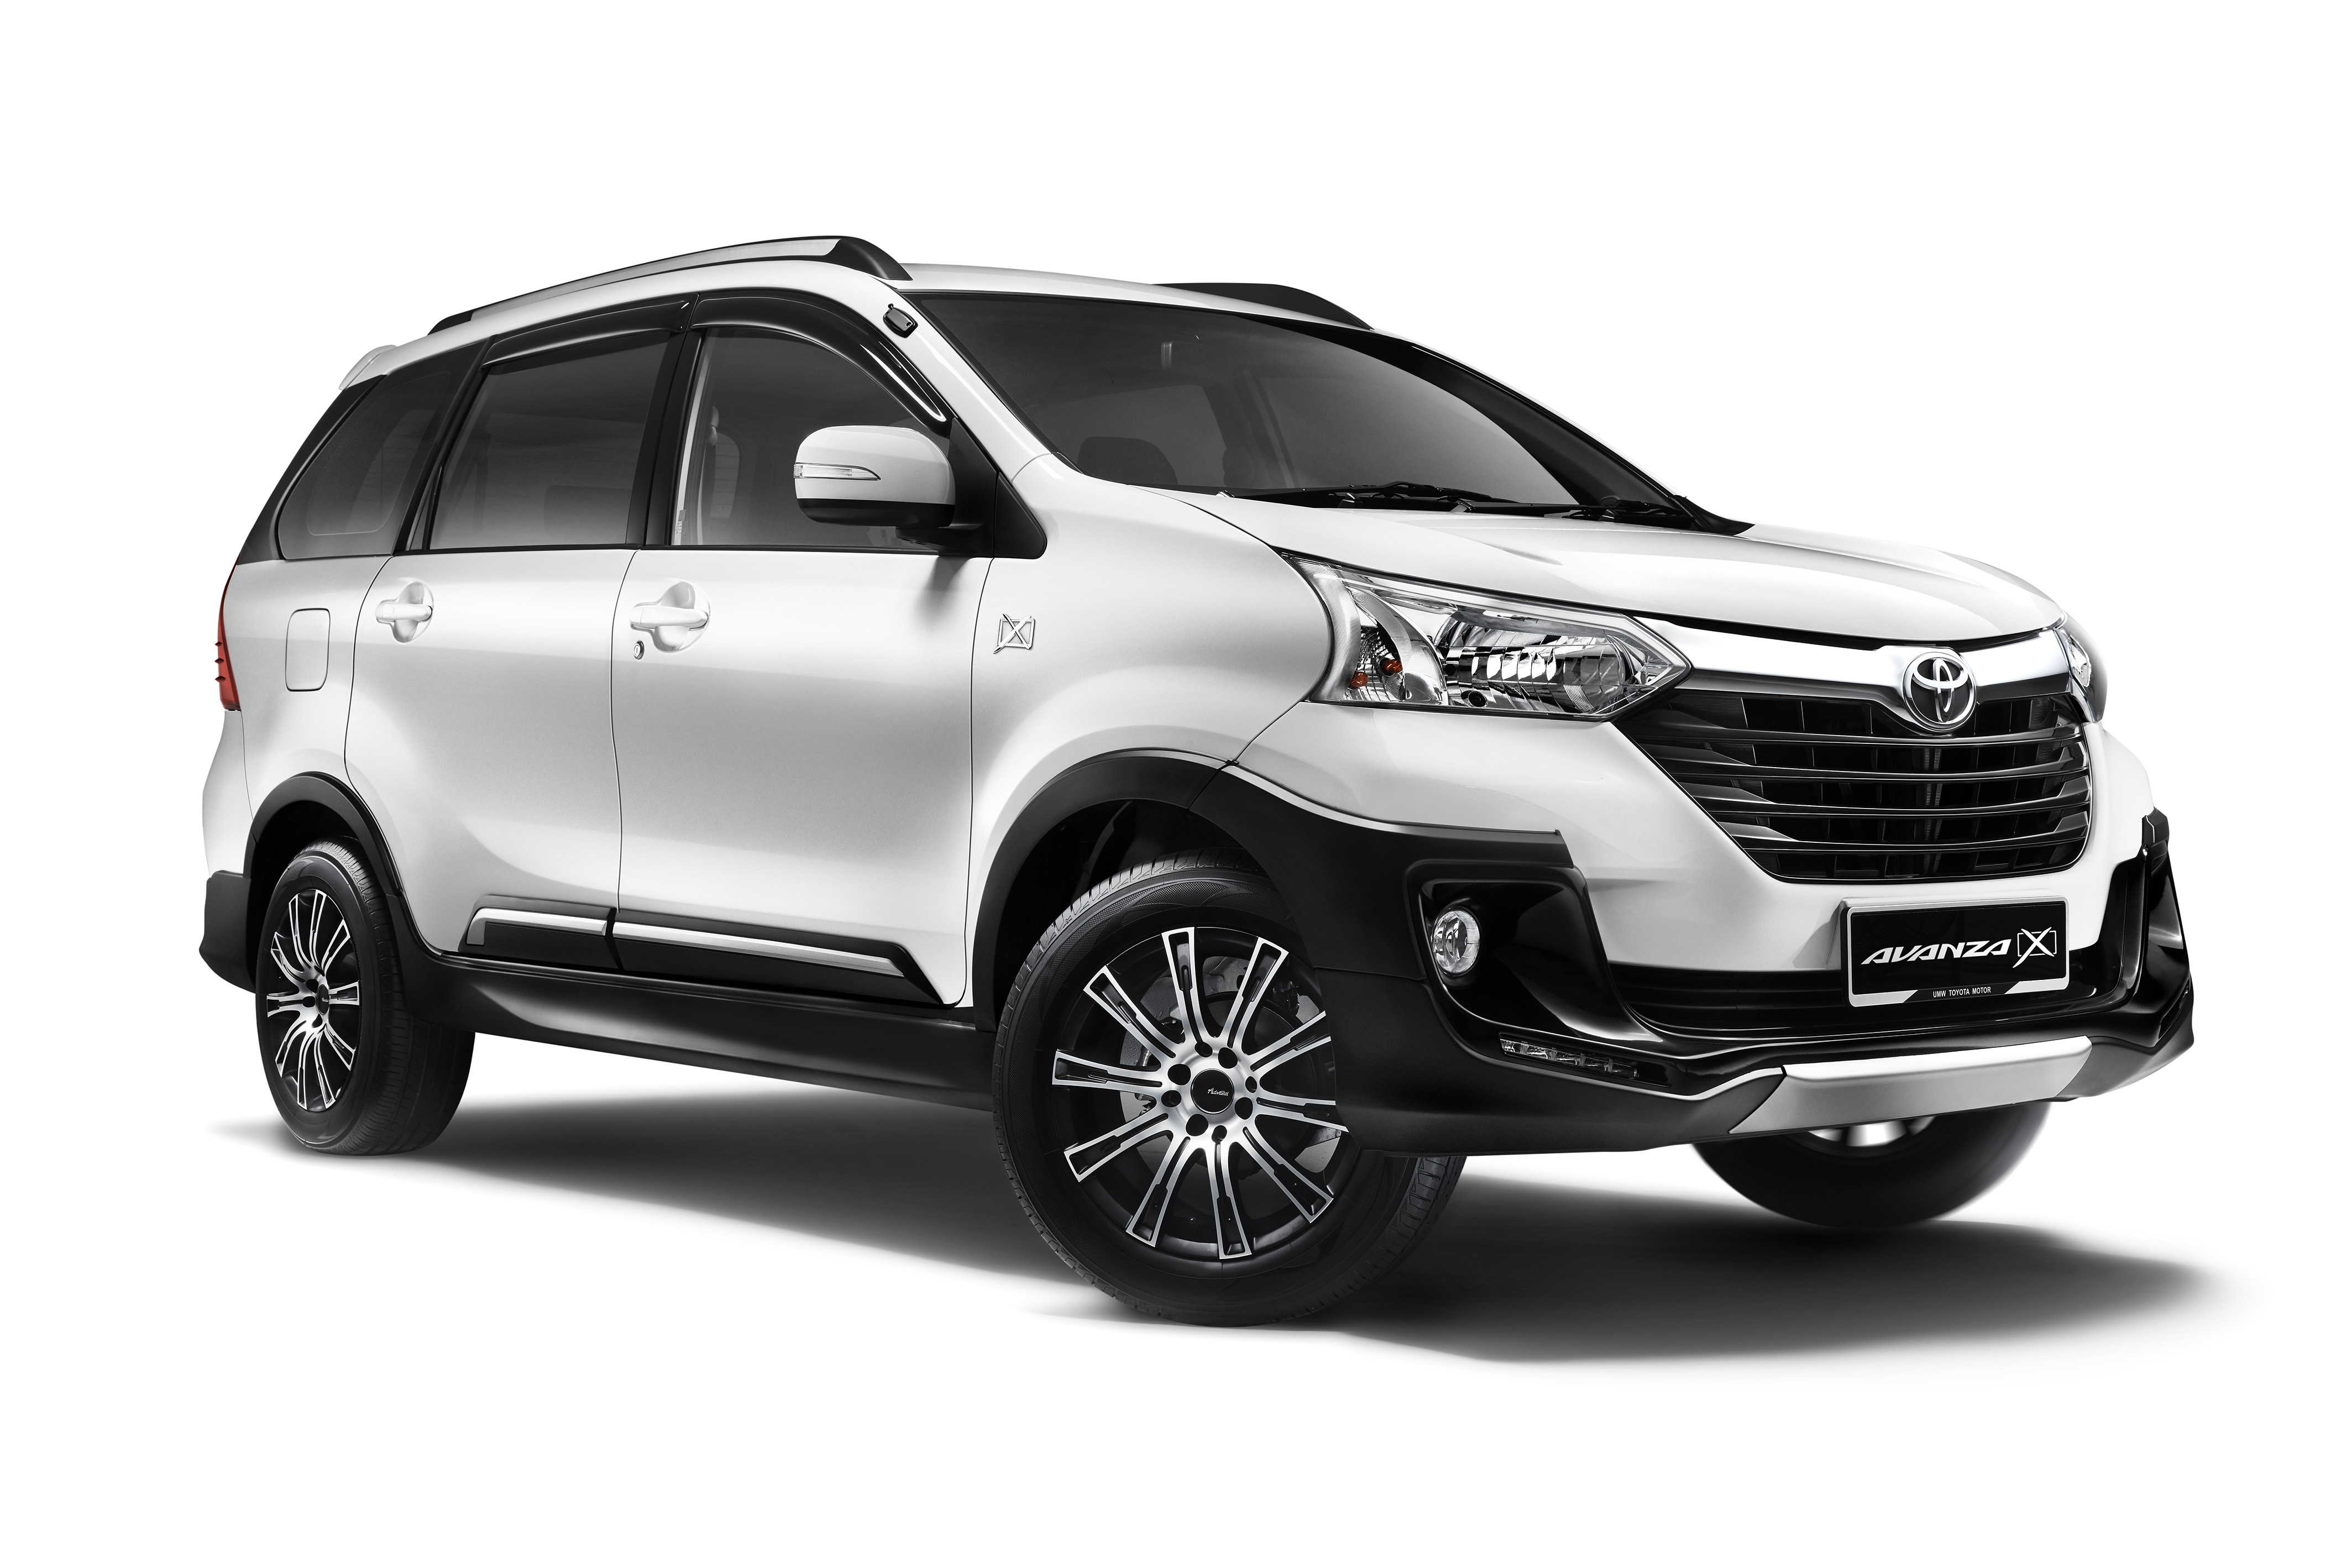 UMW Toyota Introduces Upgraded Avanza 1.5X  News and reviews on